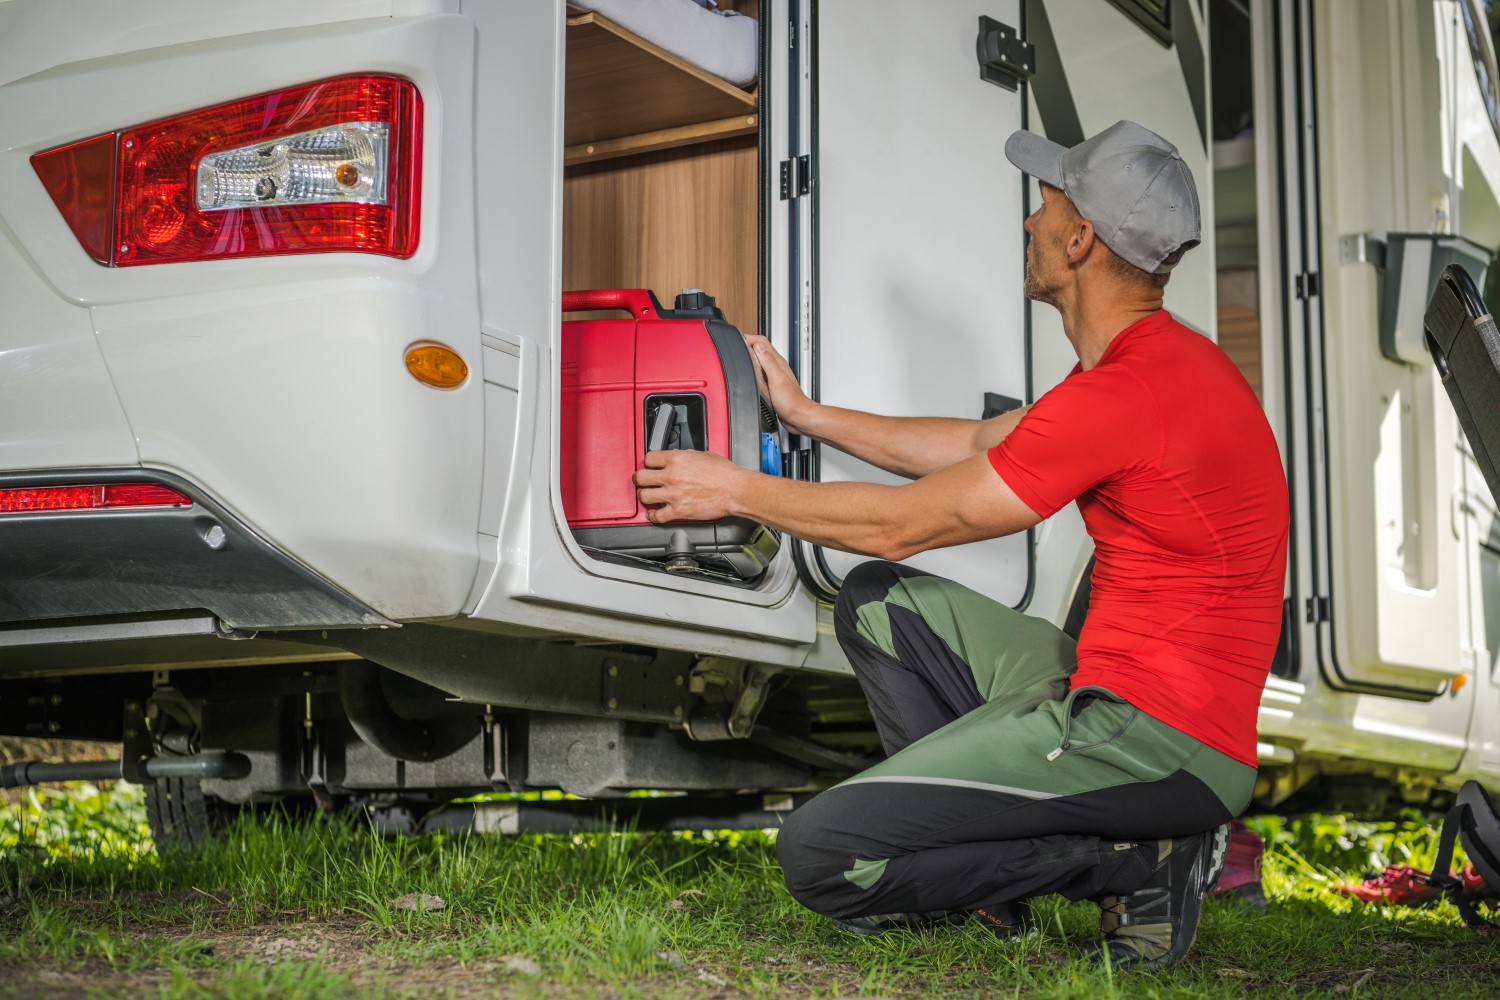 A person crouching on the ground, removing a gas generator from its storage cupboard at the back end of an RV